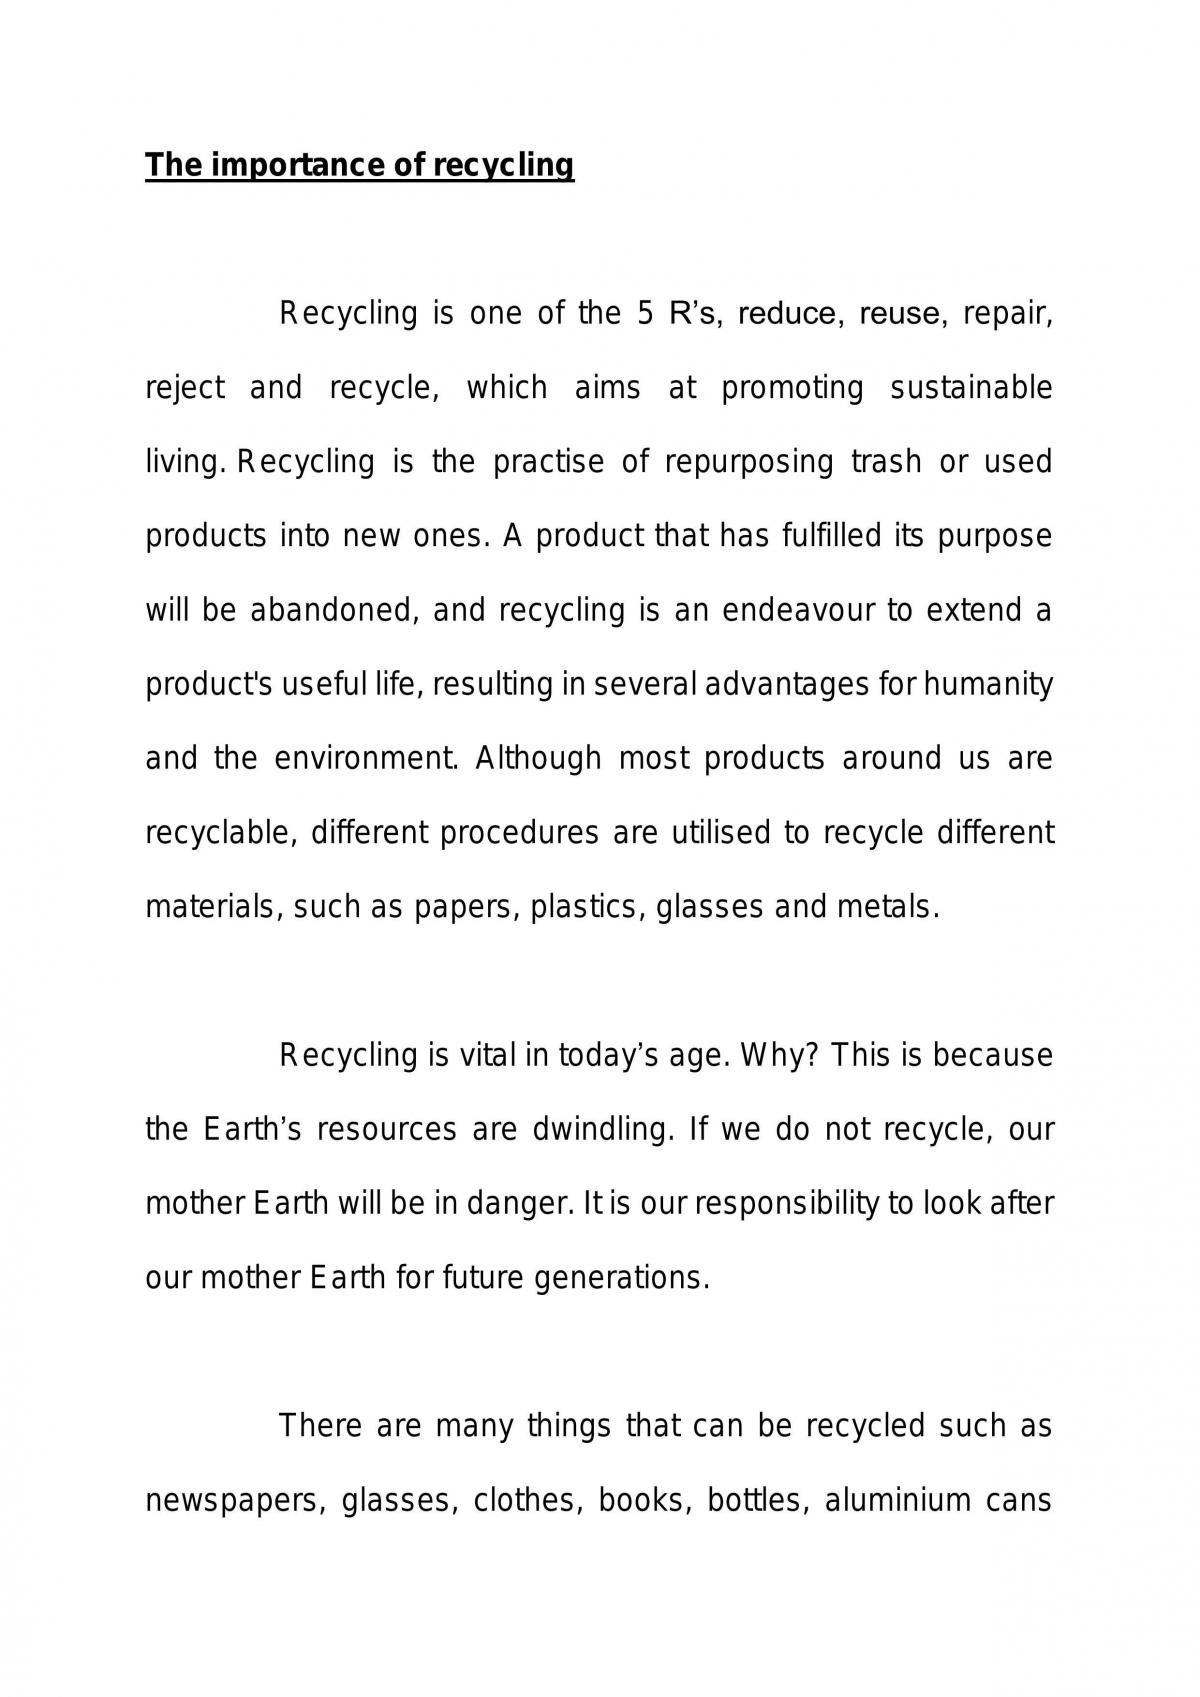 title for essay on recycling